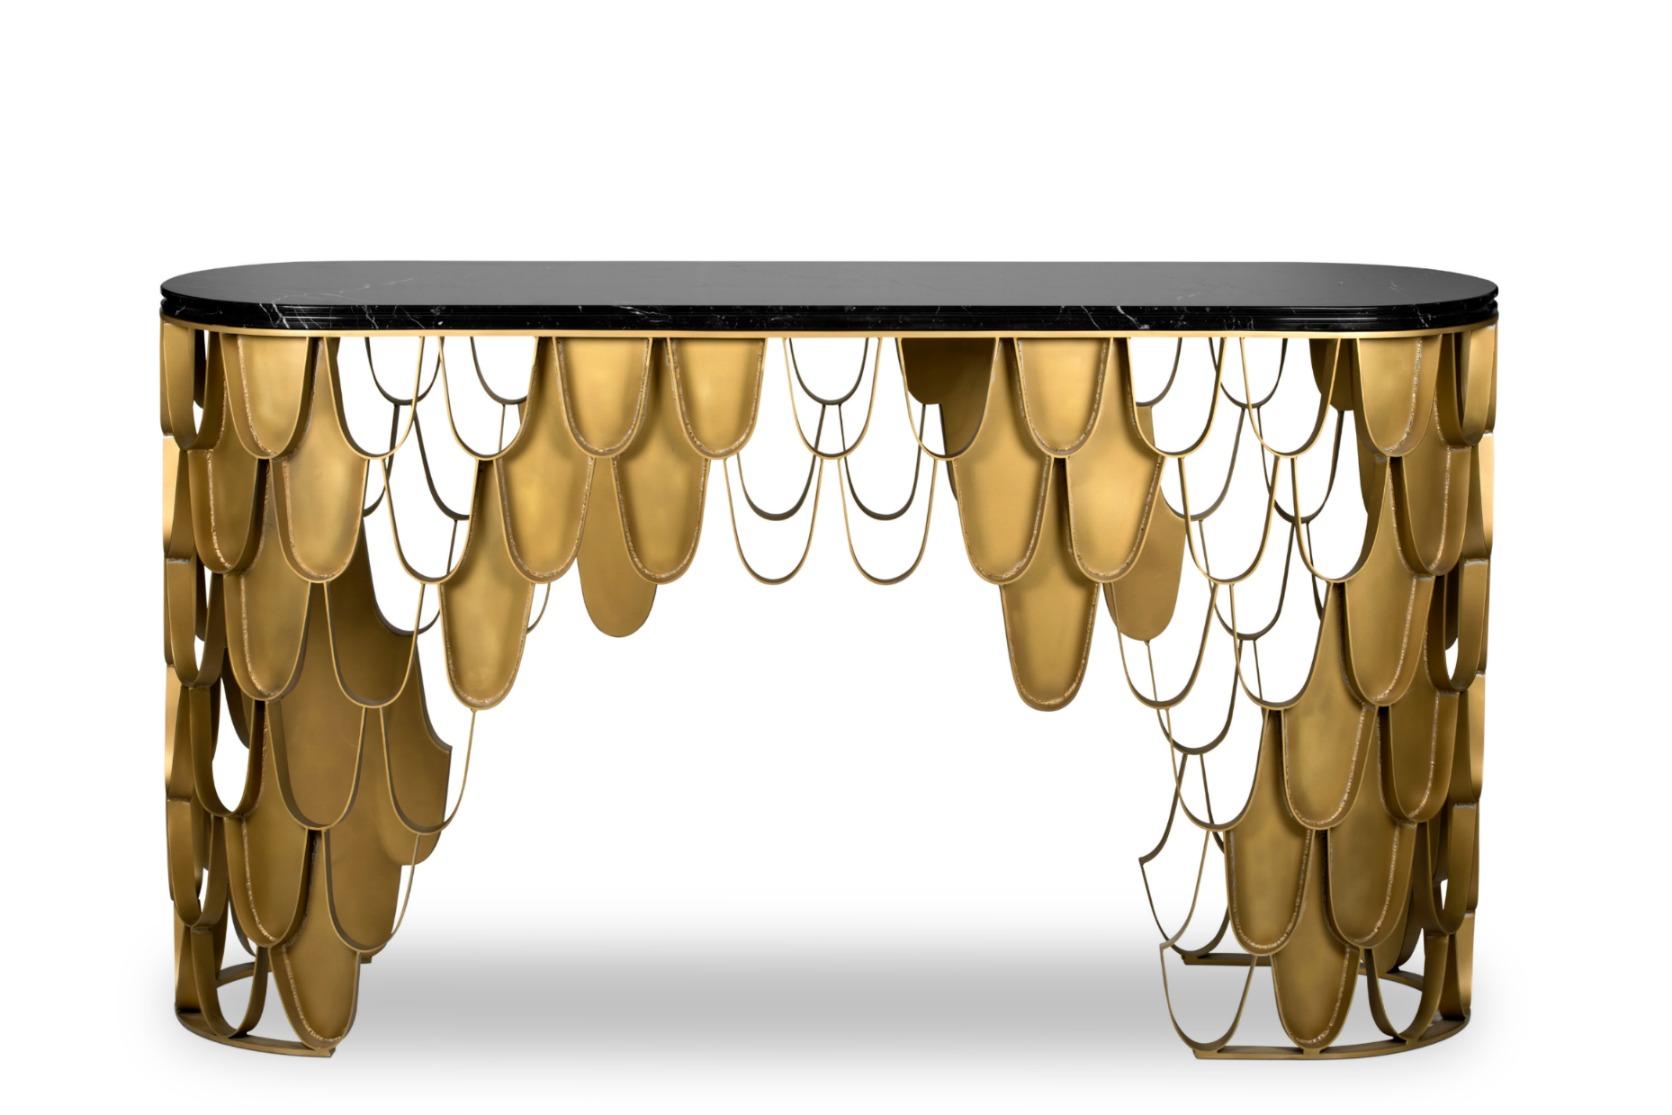 Koi carp is a recurring symbol of Japanese culture. Its natural color mutations reveal their capacity to adapt, just like KOI console table. This foyer table will add refined elegance to any modern interior design.
Base in brushed aged brass, top in